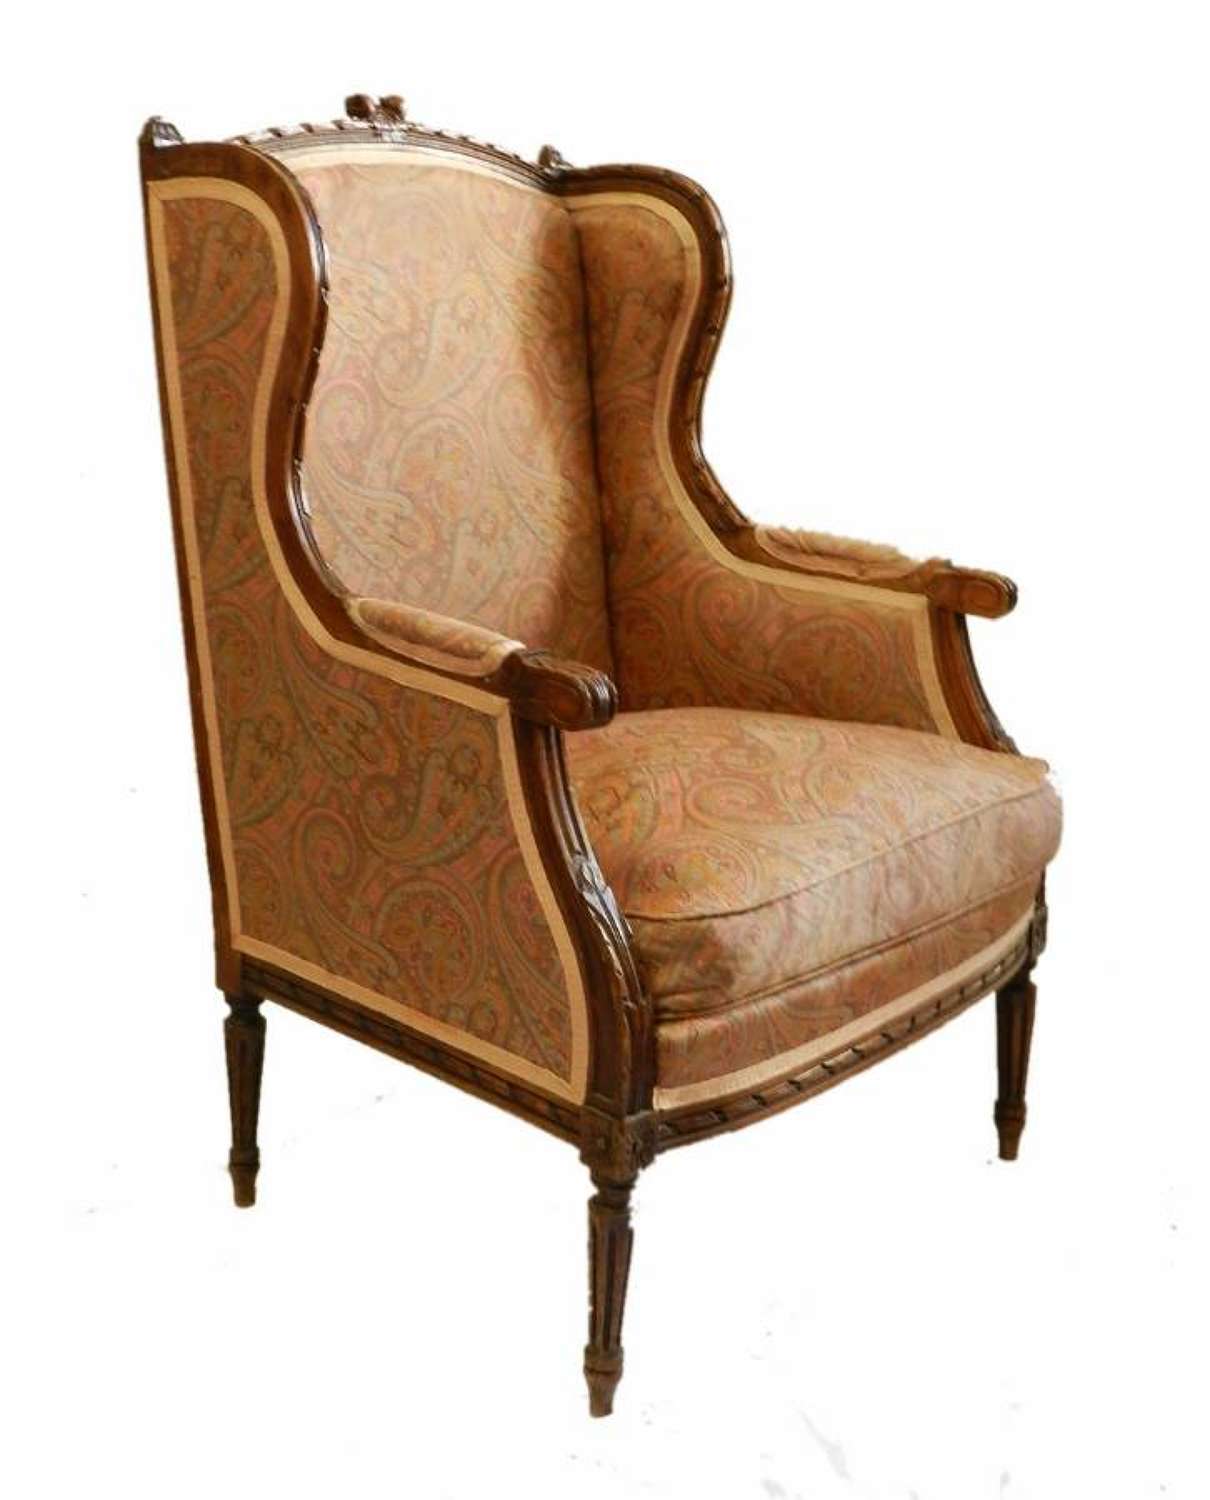 French Bergere Armchair C19 Louis XVI st